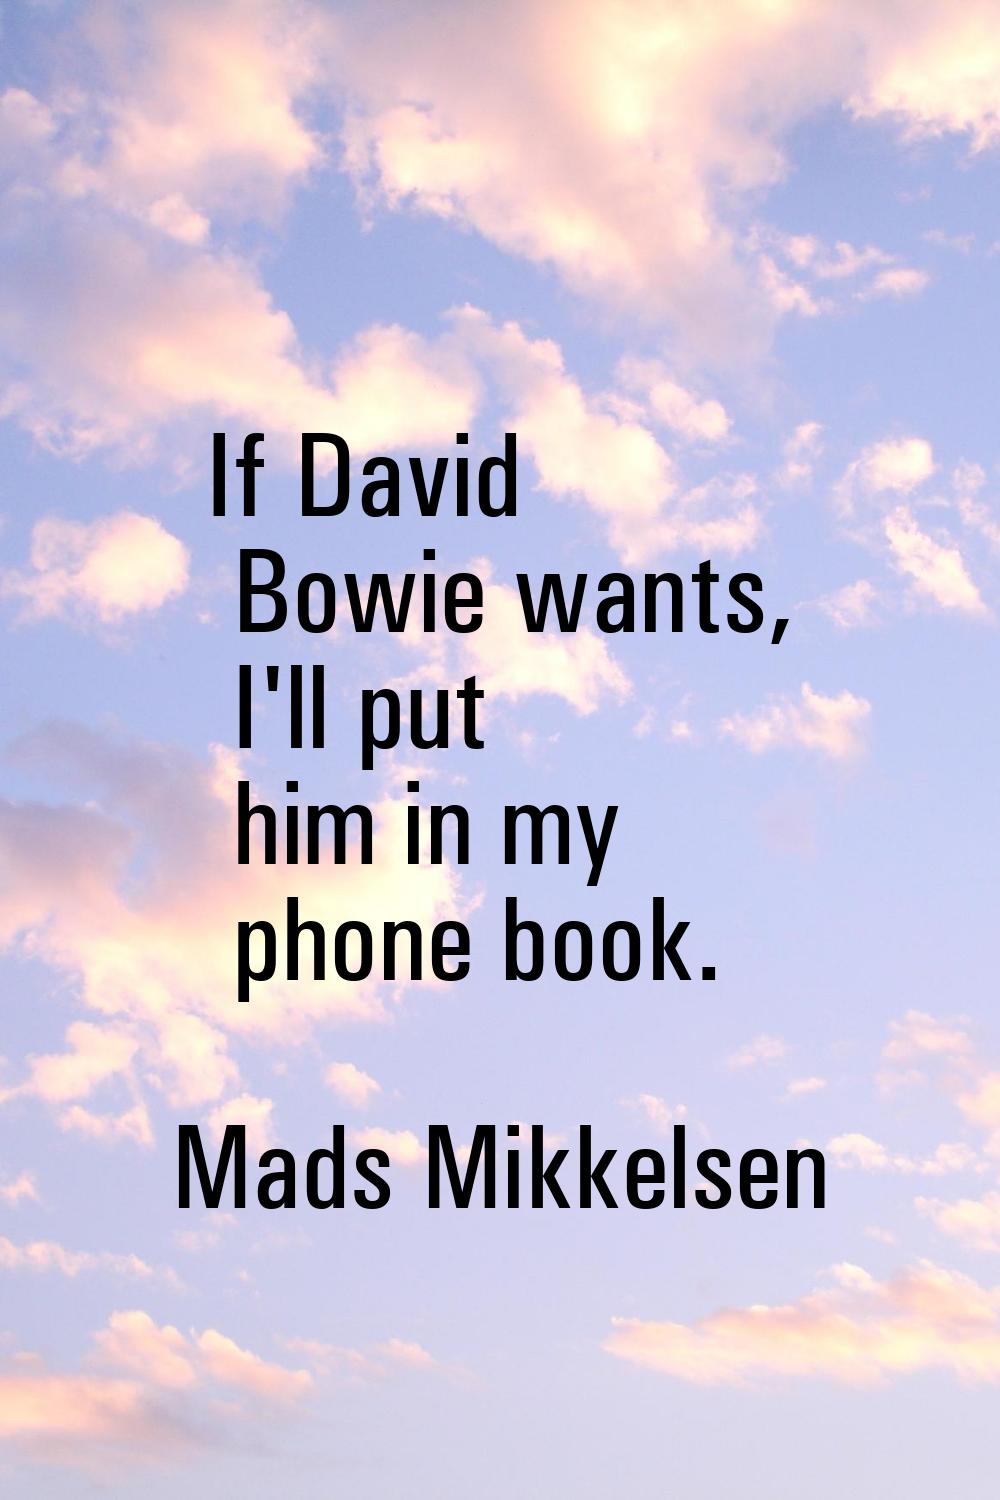 If David Bowie wants, I'll put him in my phone book.